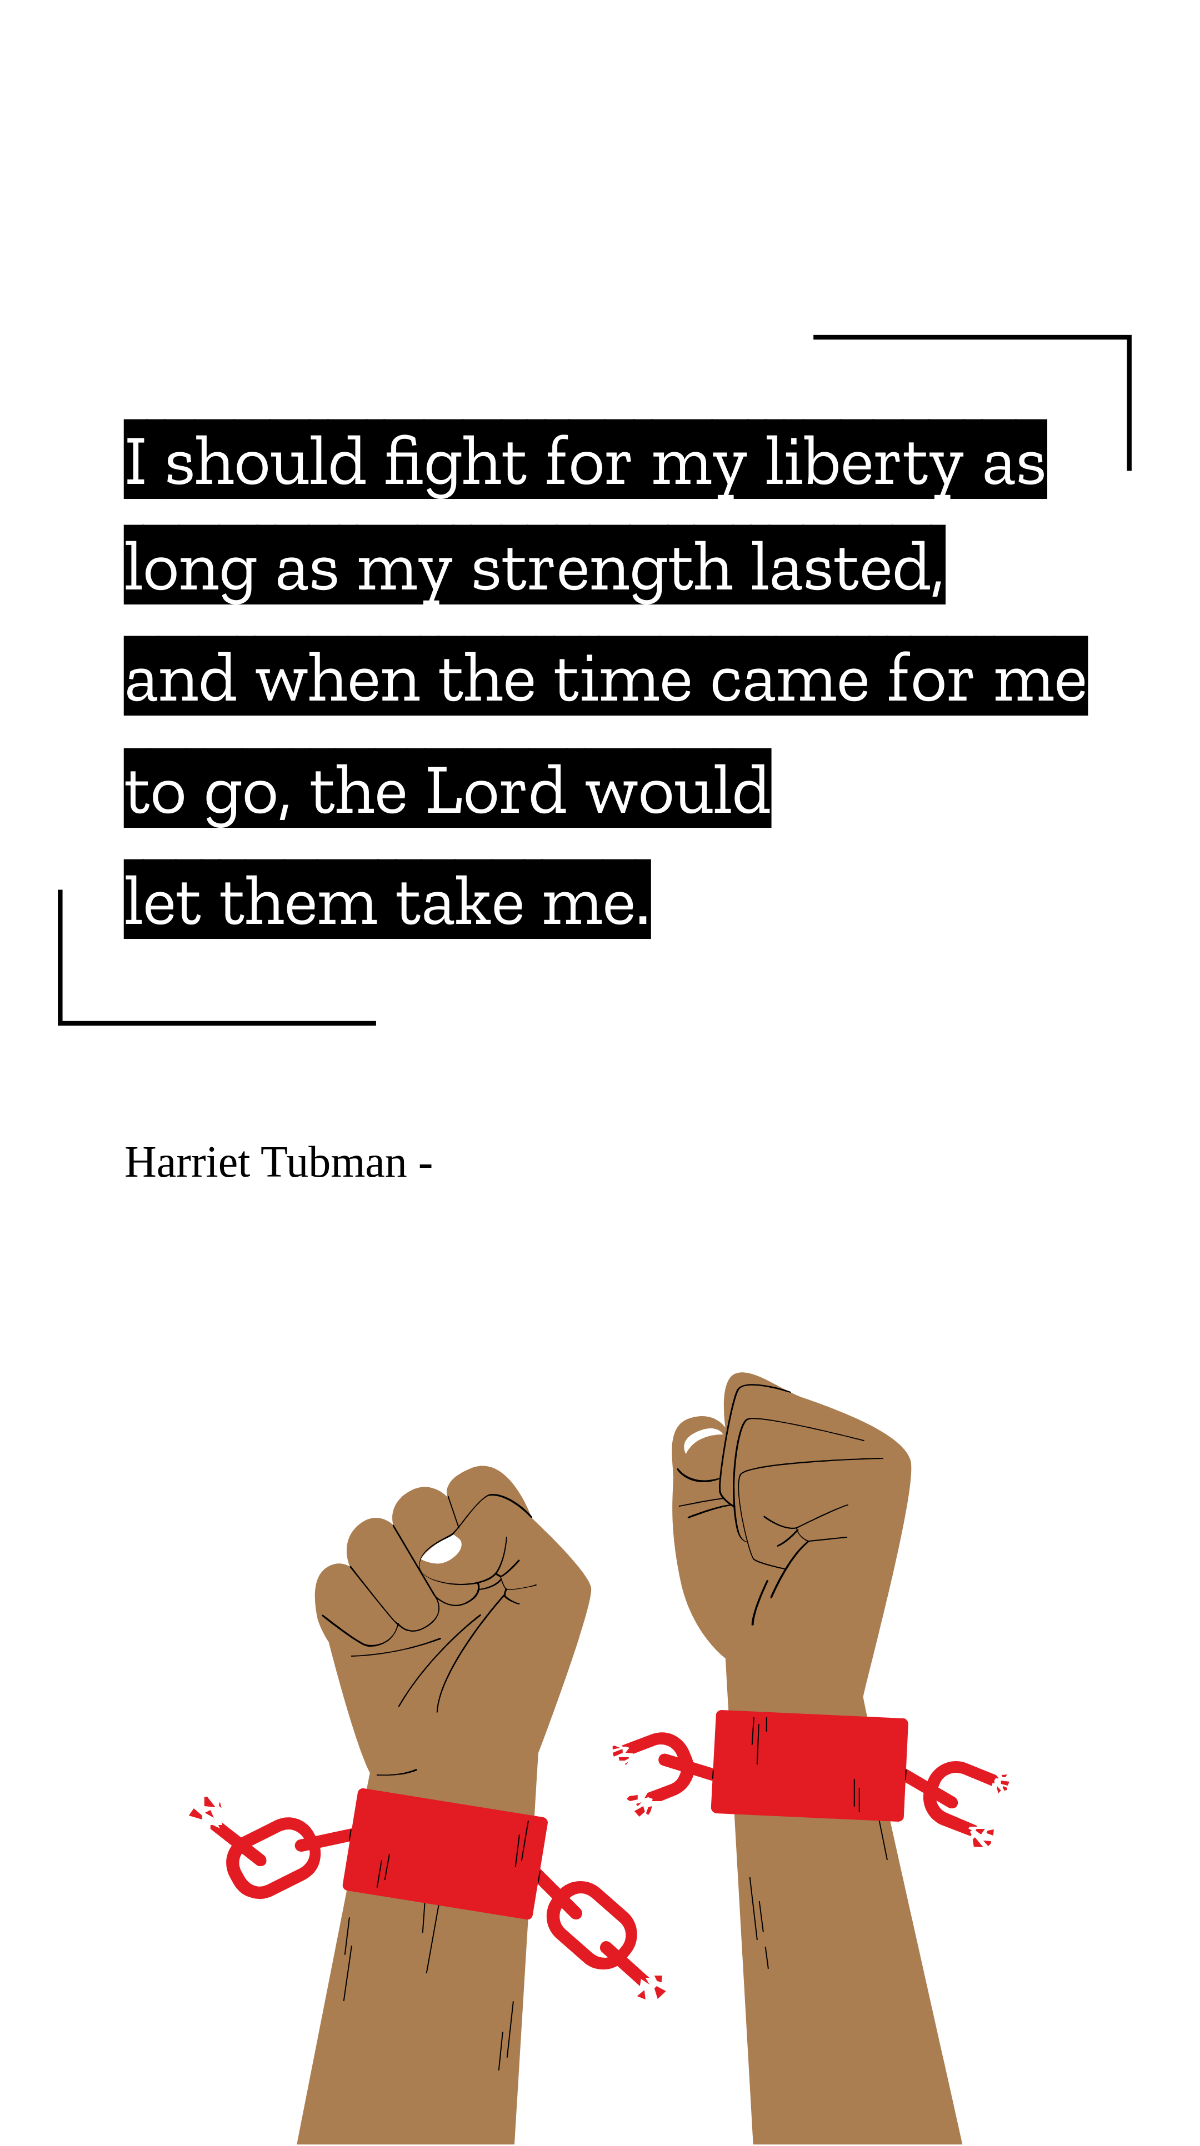 Harriet Tubman - I should fight for my liberty as long as my strength lasted, and when the time came for me to go, the Lord would let them take me. Template